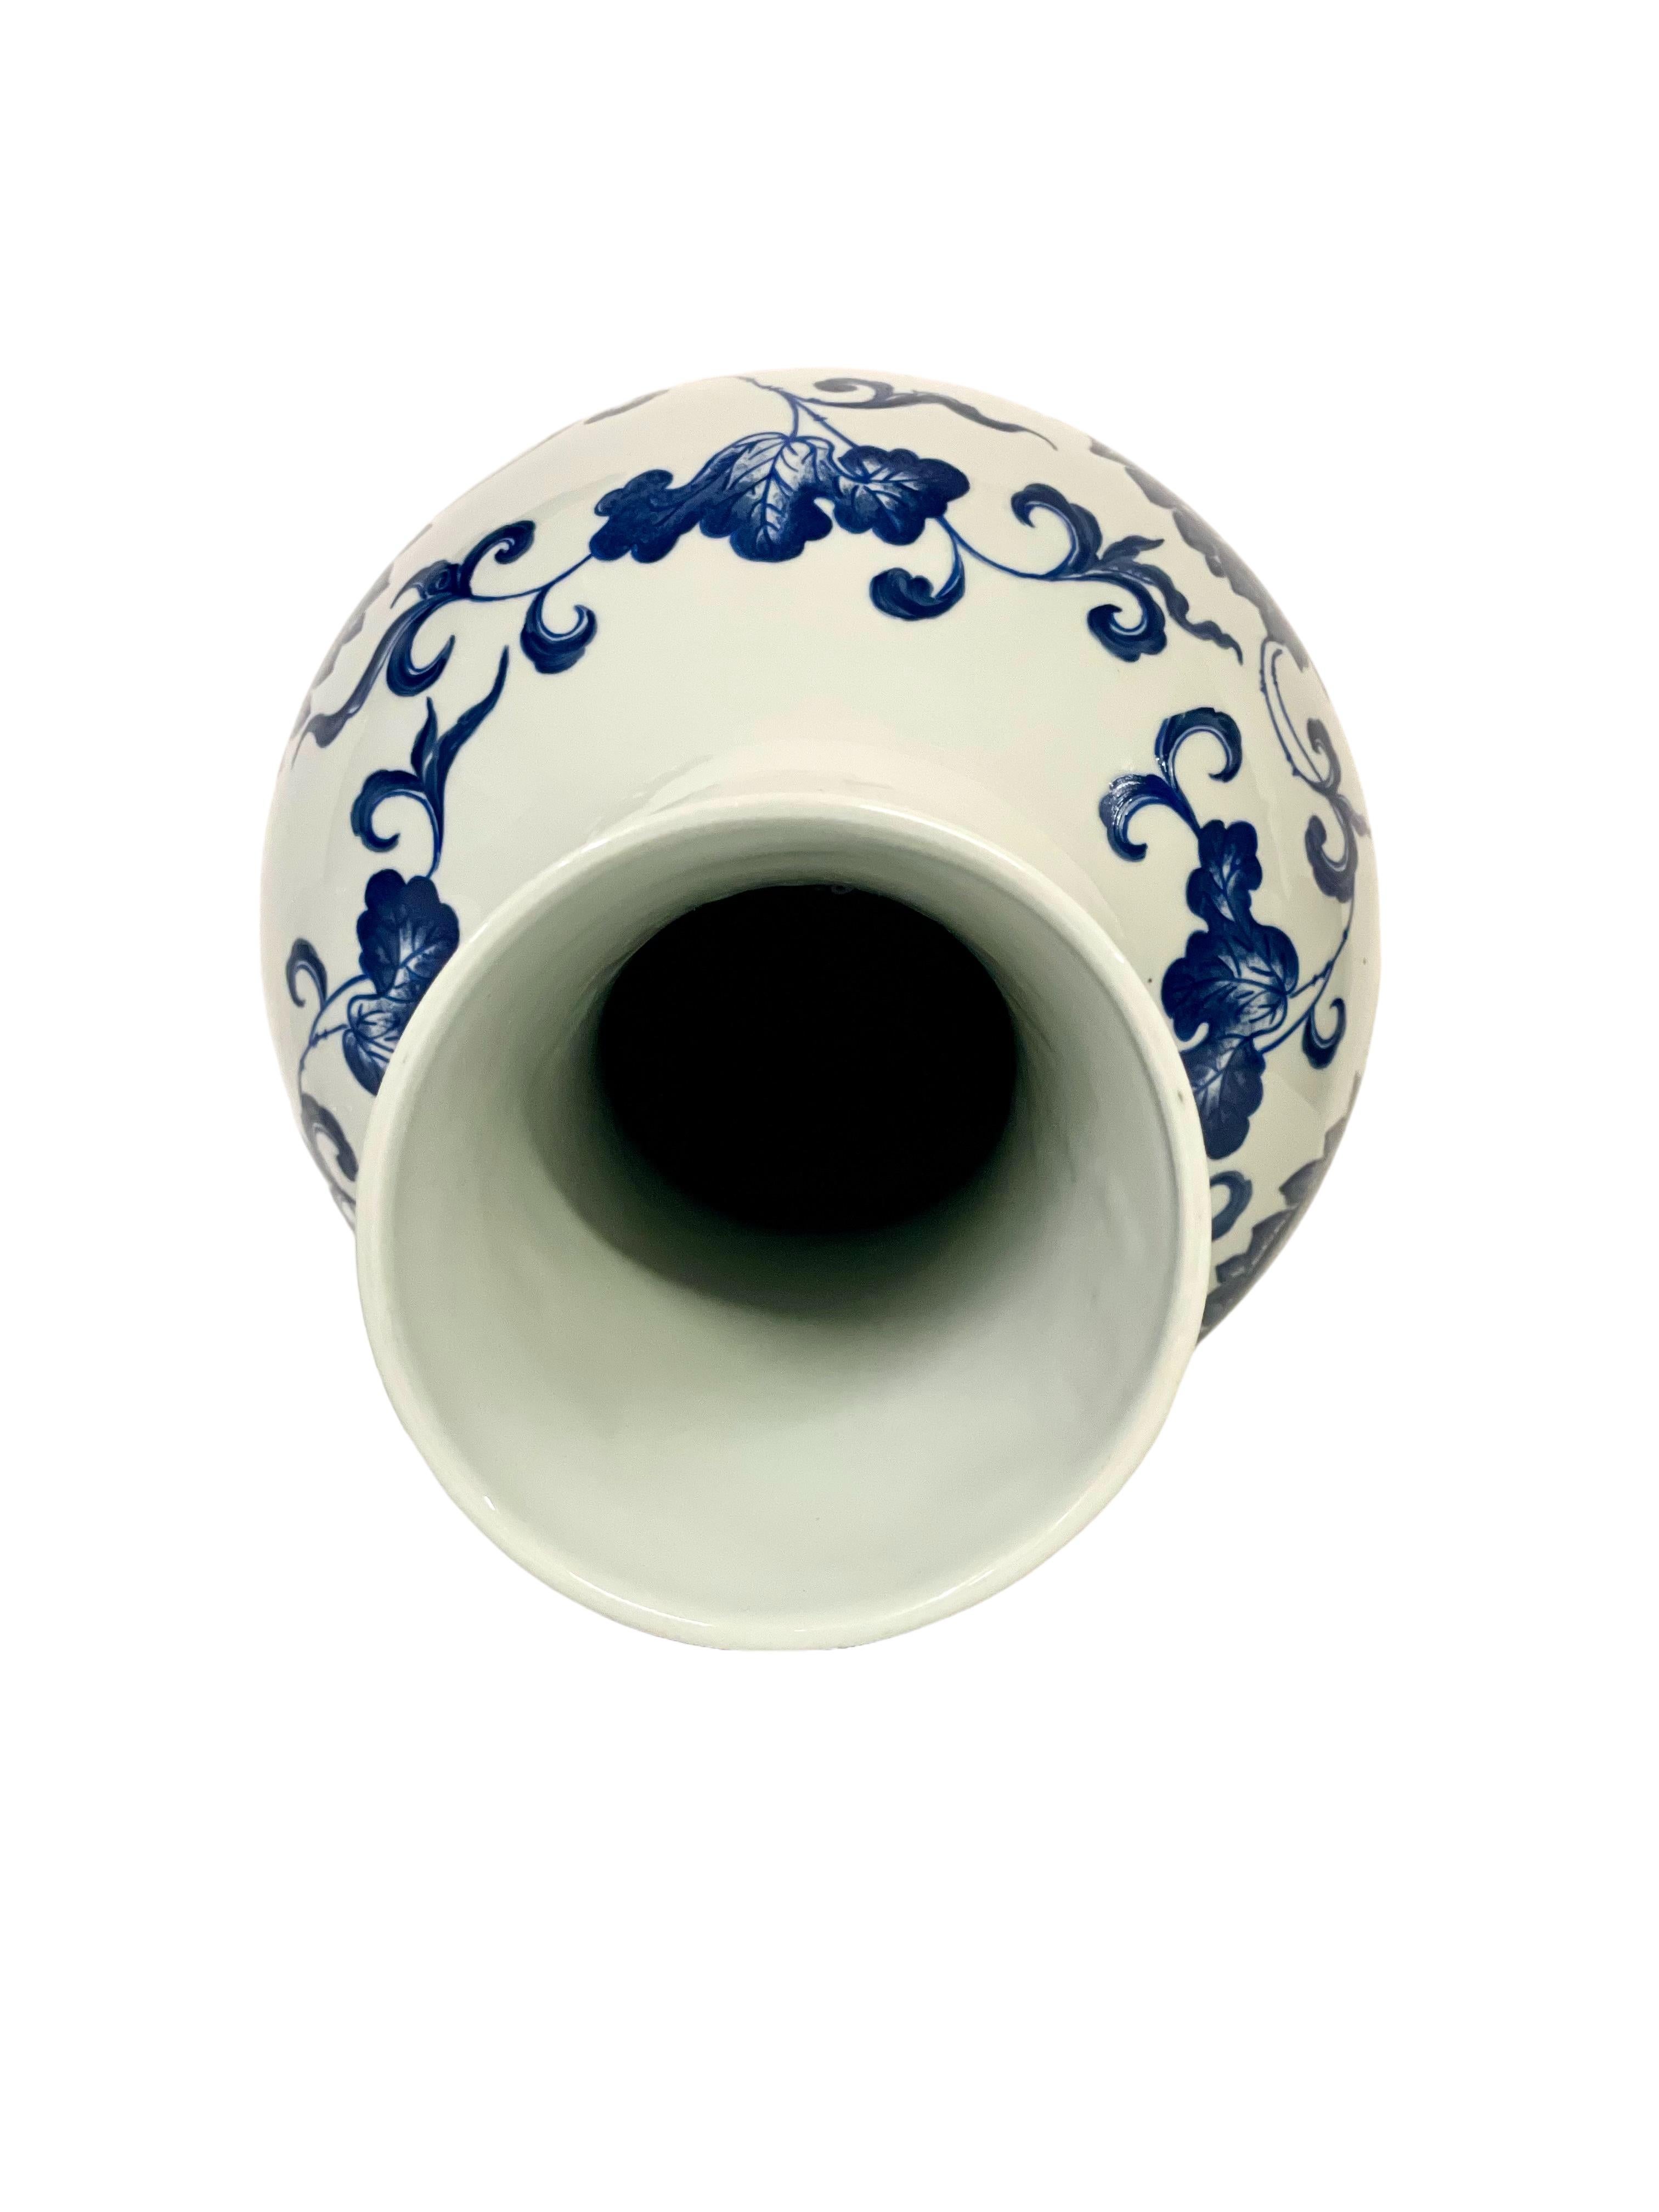 19th Century Tall Blue and White Paris Porcelain Vase For Sale 2